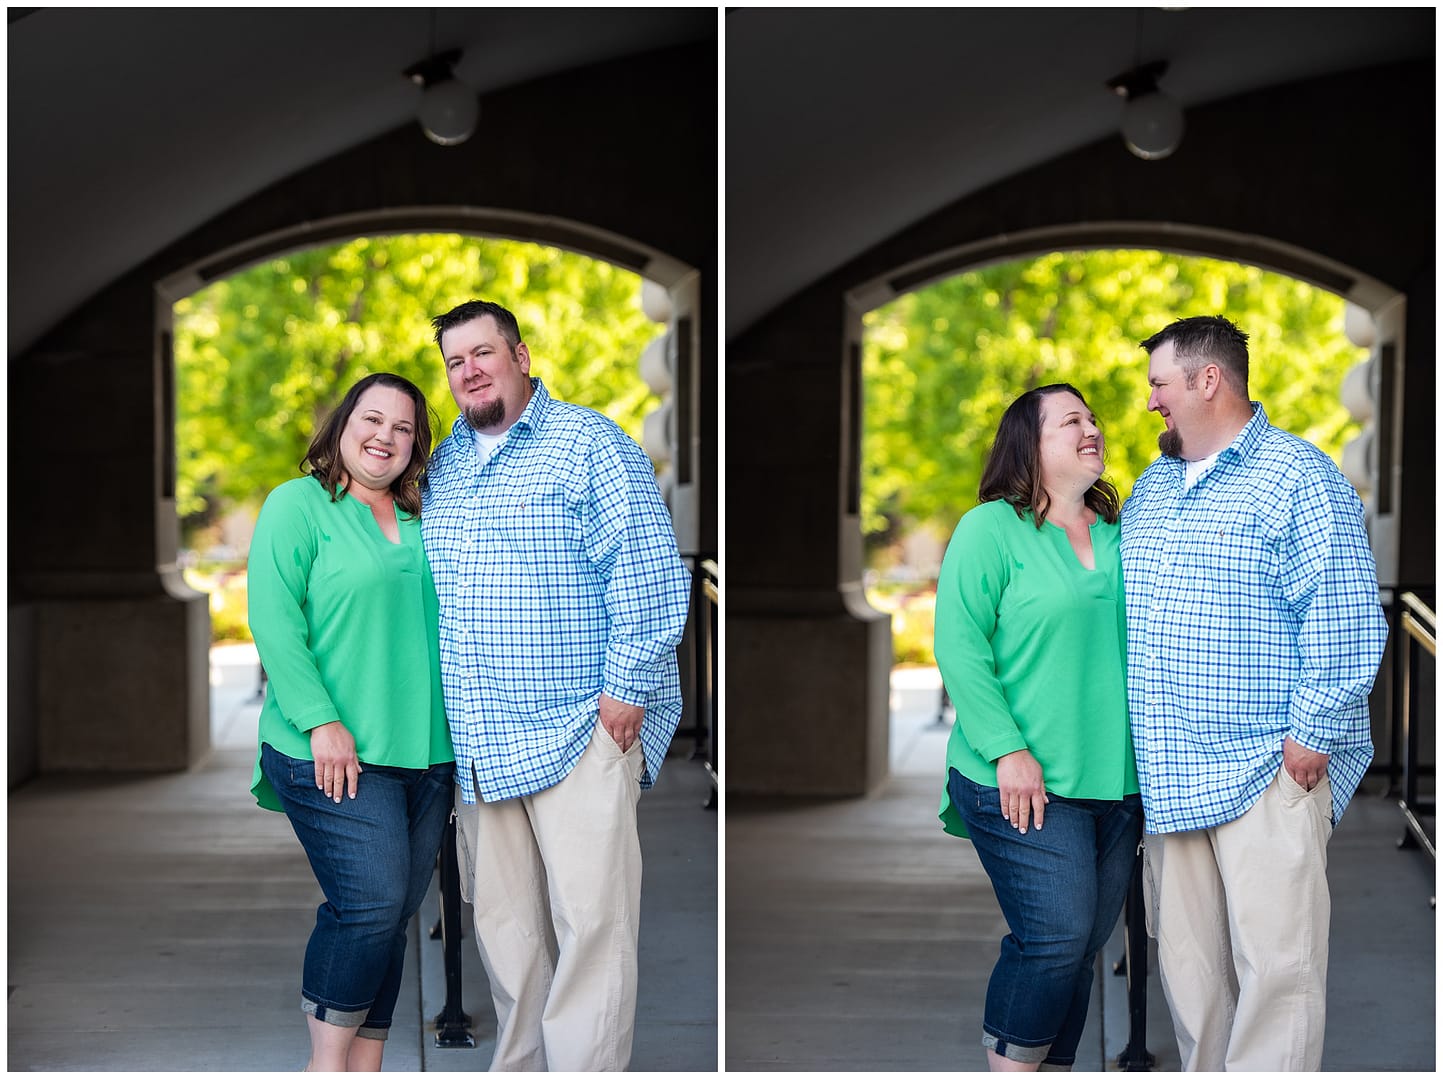 Mom & Dad pose for photos. Photos by Tiffany Hix Photography.